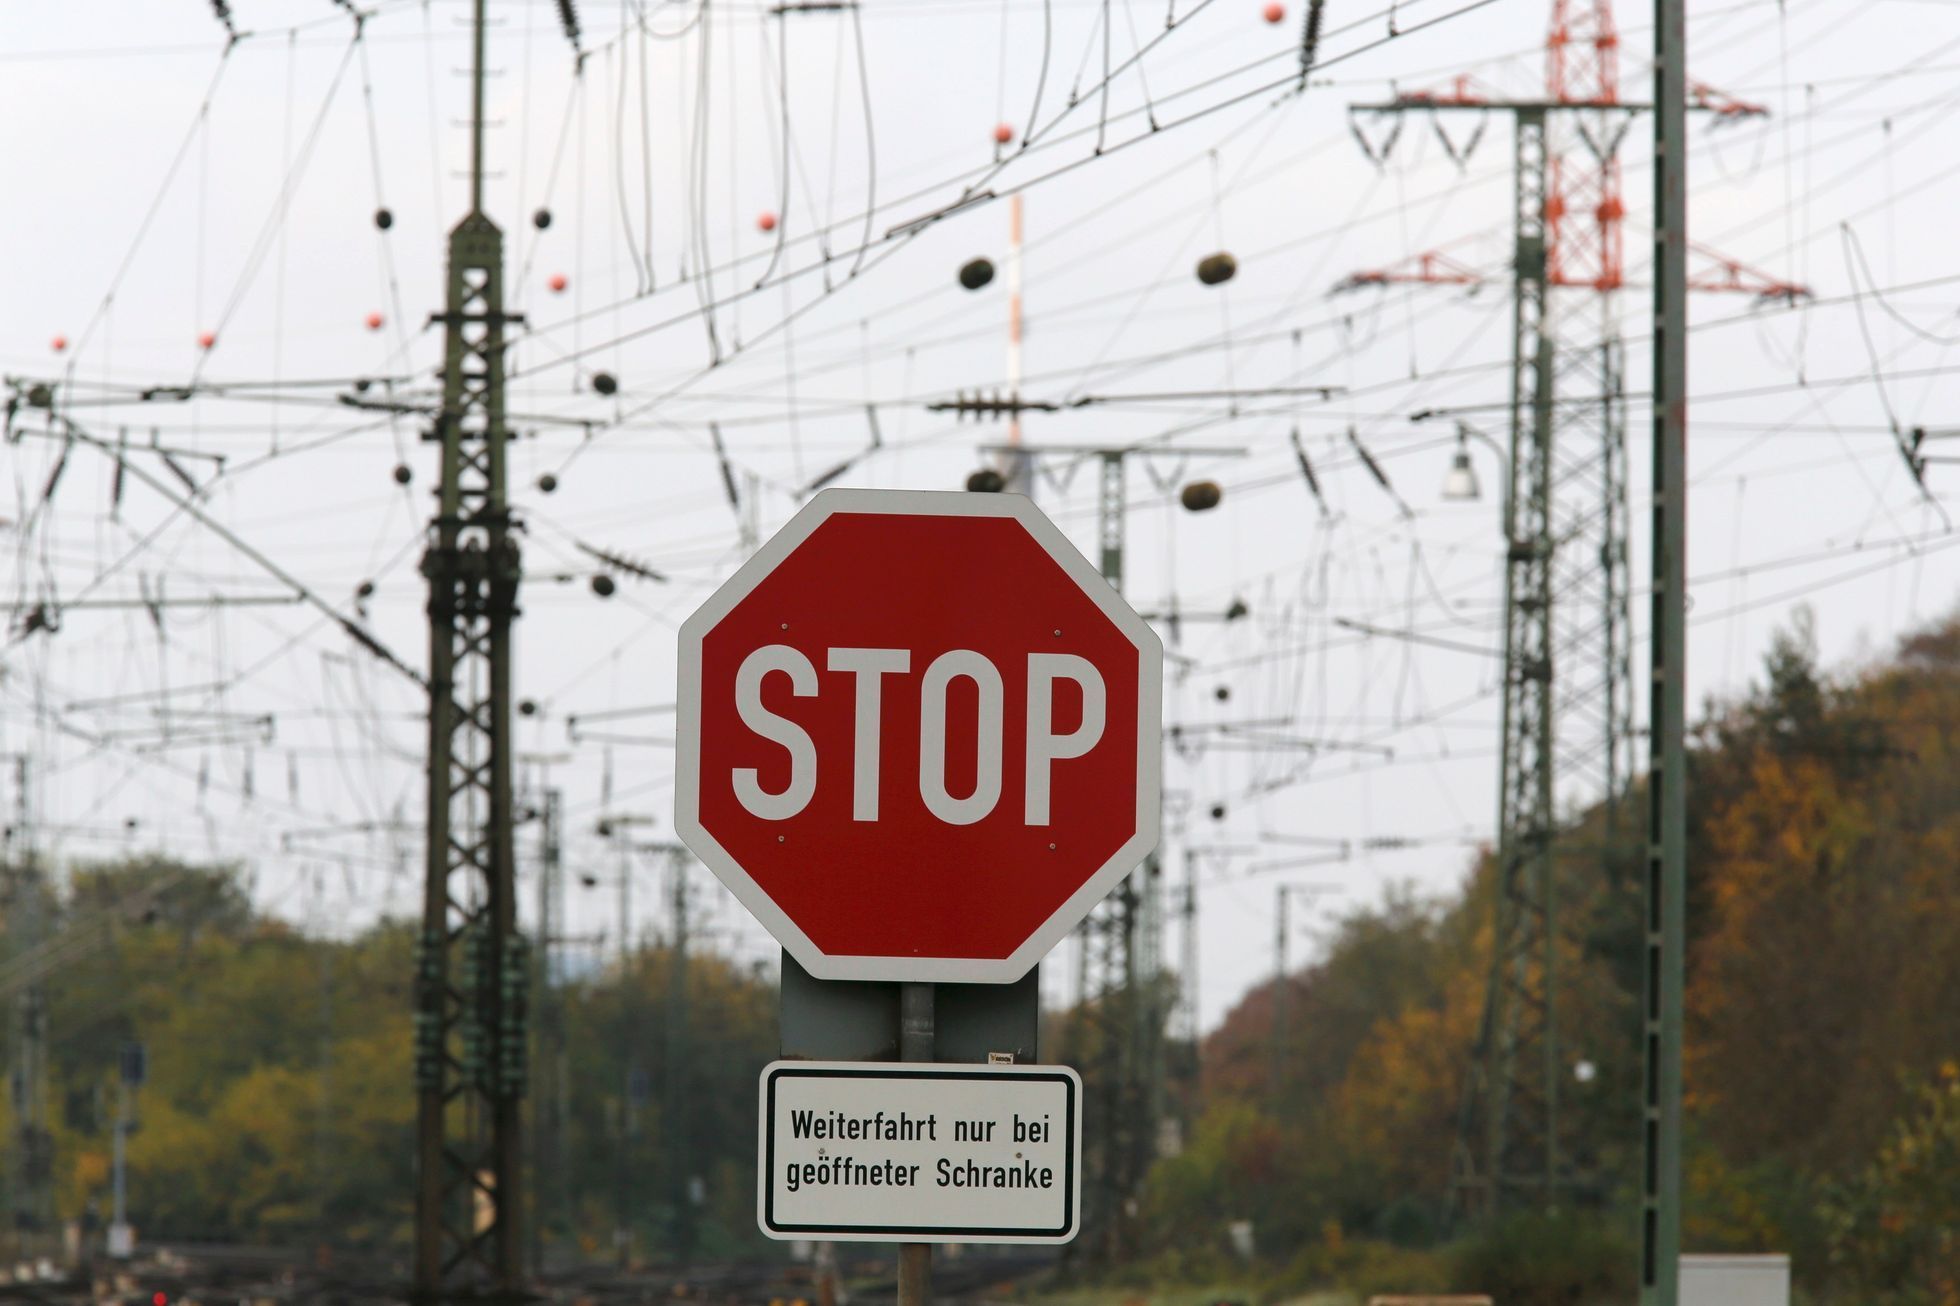 A stop sign stands in a train depot in Gremberg